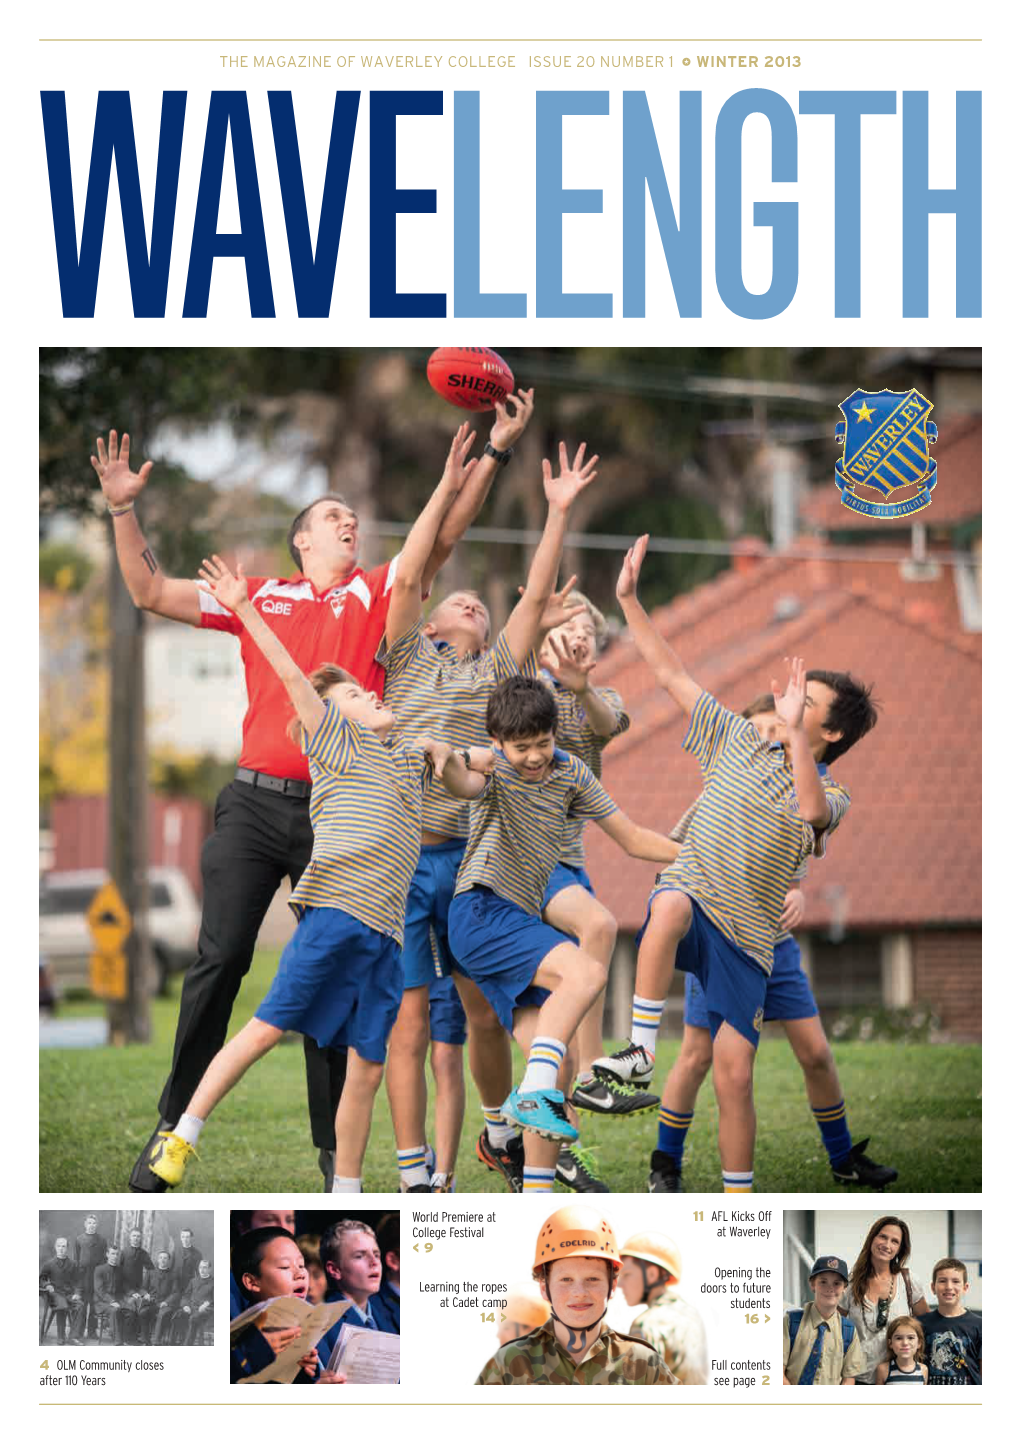 The Magazine of Waverley College Issue 20 Number 1 @ Winter 2013